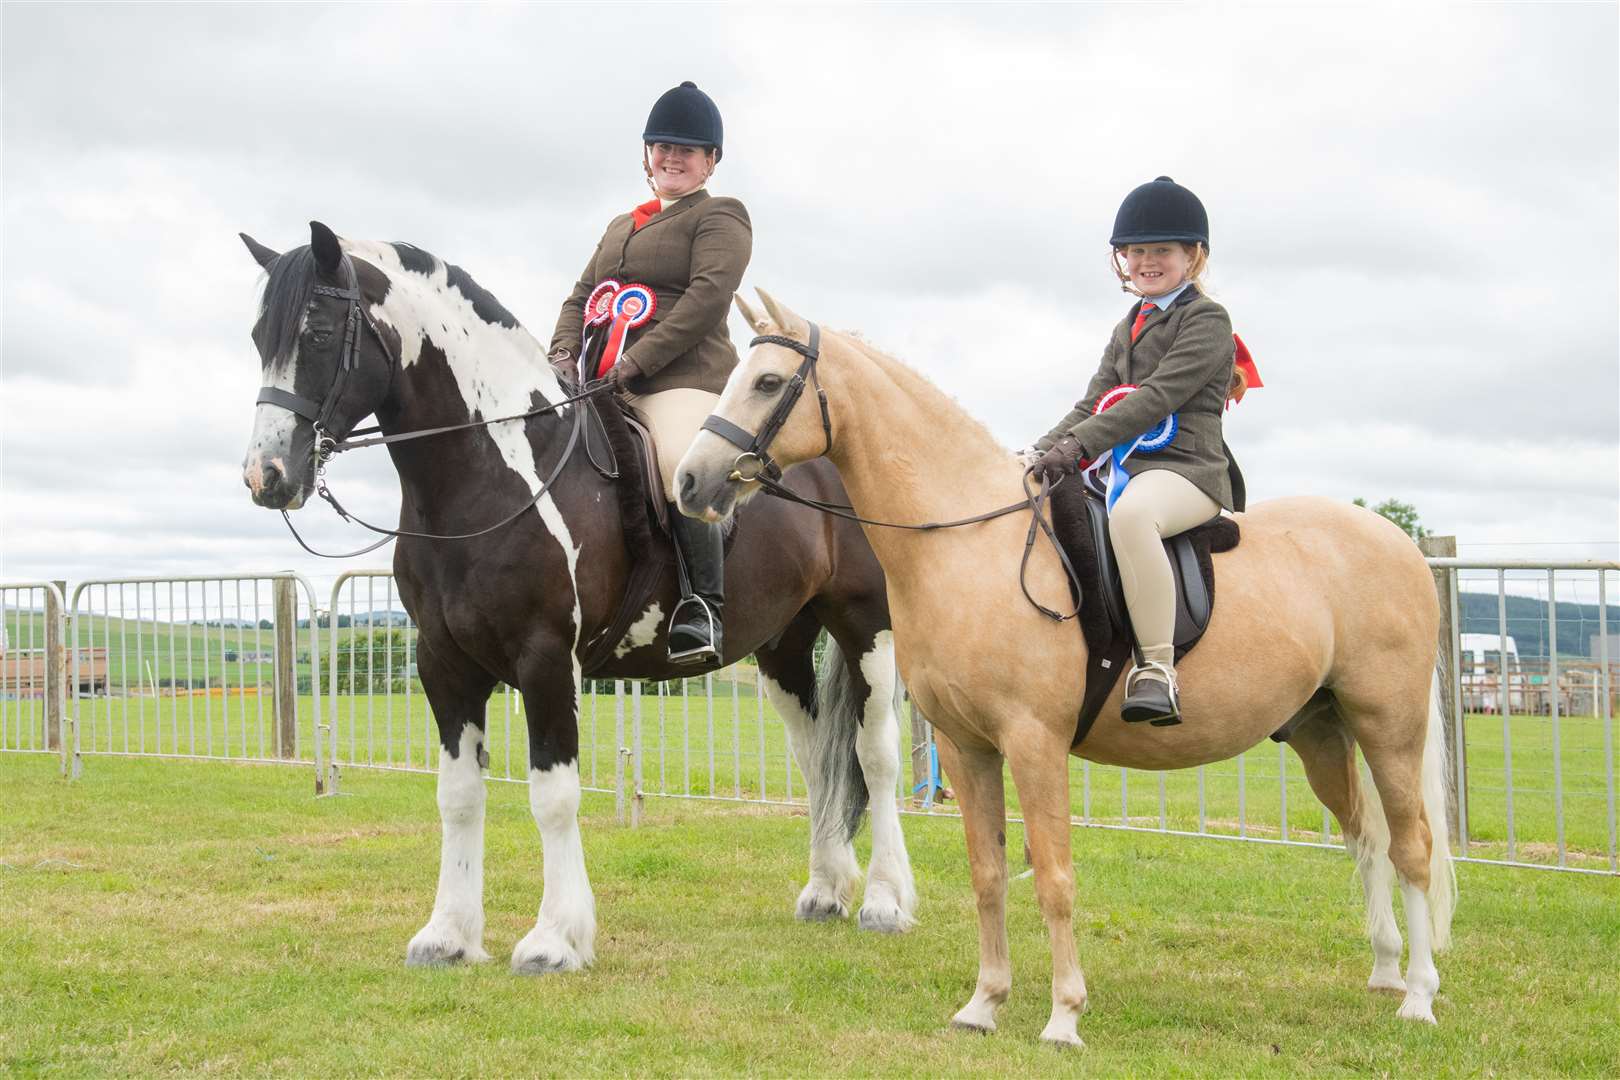 Kim Gill on Jiggy and daughter Evie Young on Pinelodge Pizzazz. Picture: Daniel Forsyth